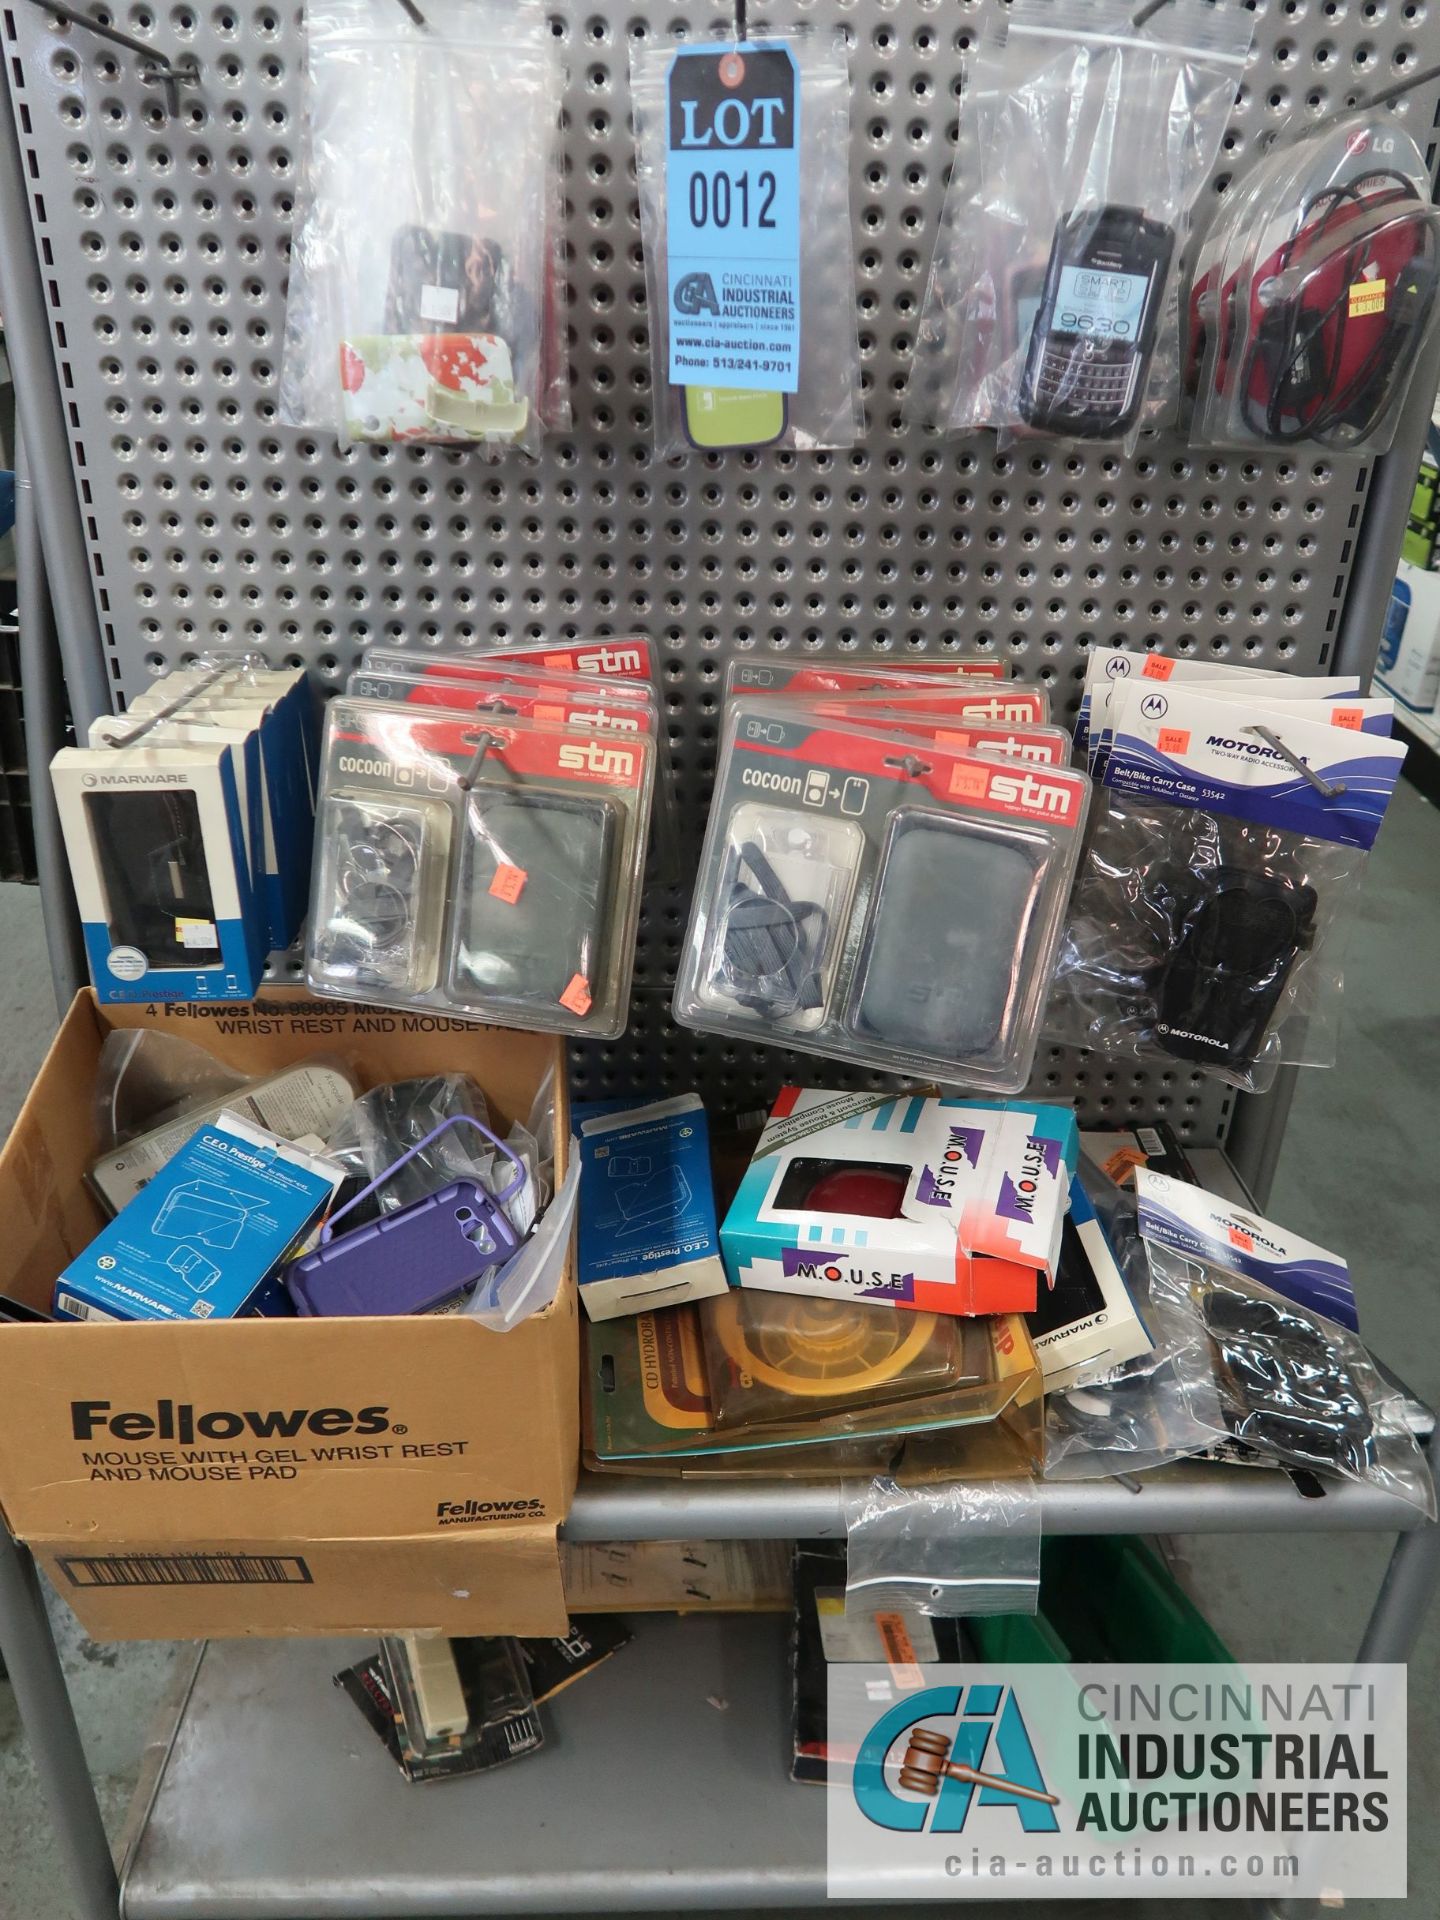 CONTENTS ON DISPLAY RACK INCLUDING CELL PHONE CASES